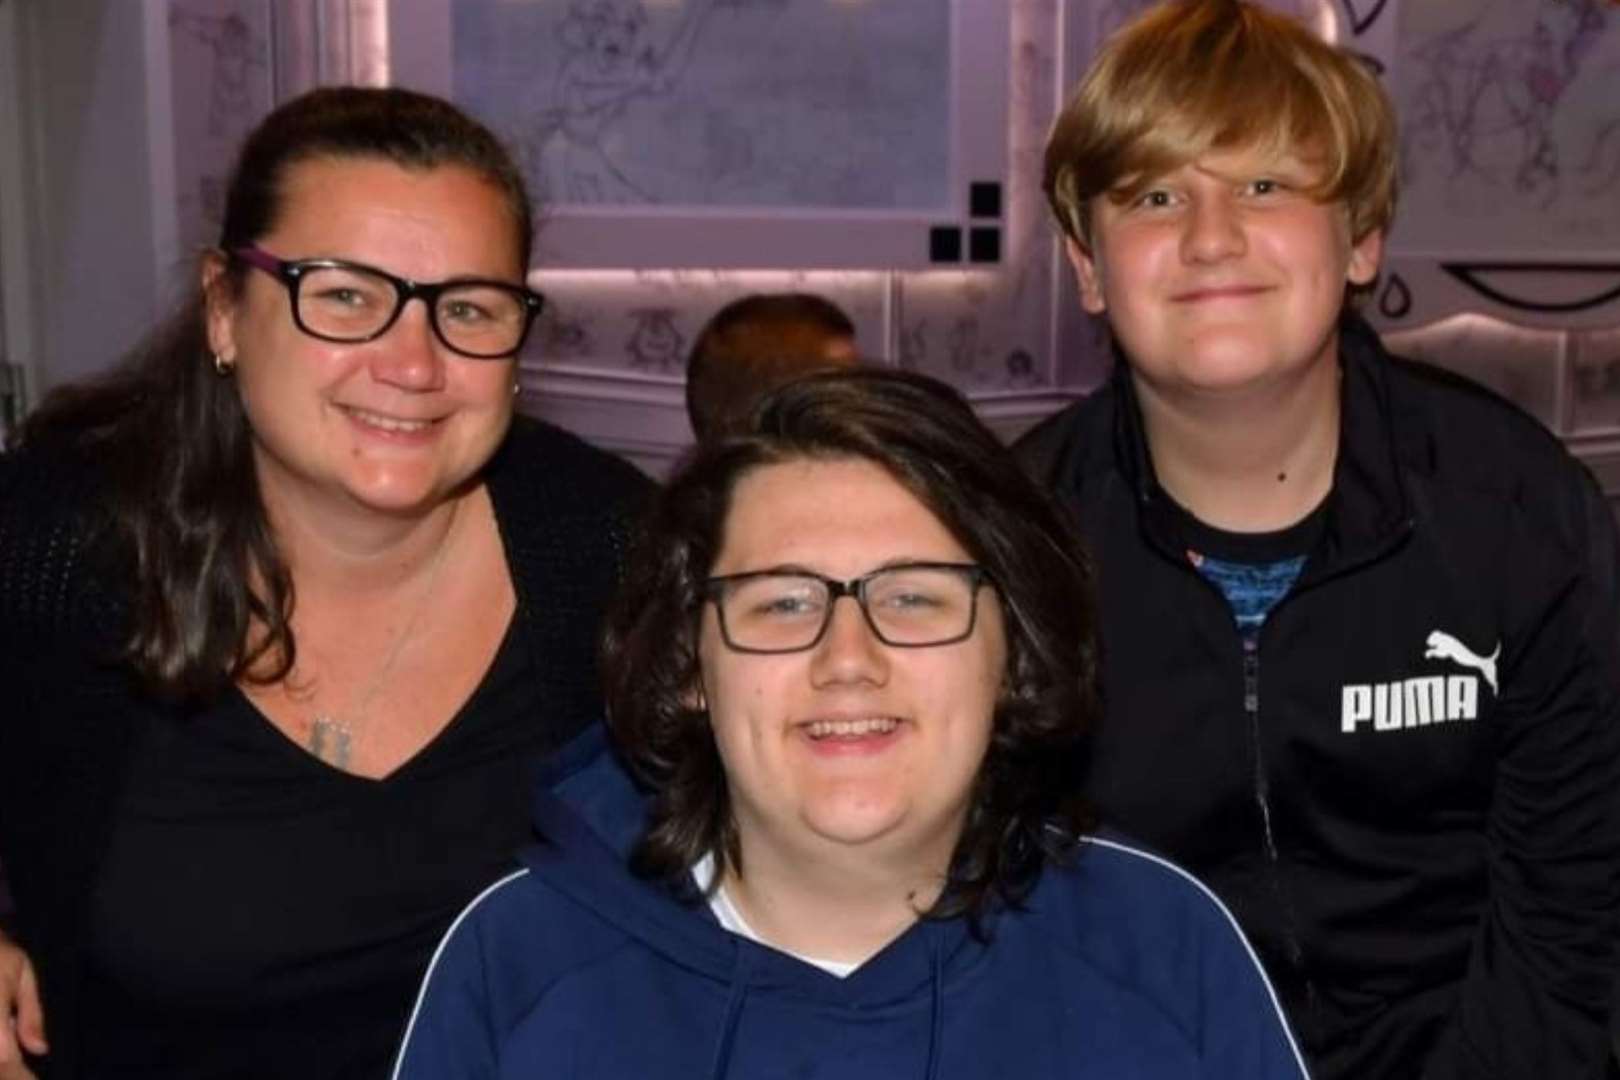 Tributes have been paid to Ethan Entwistle, pictured here (centre) with his mum and brother